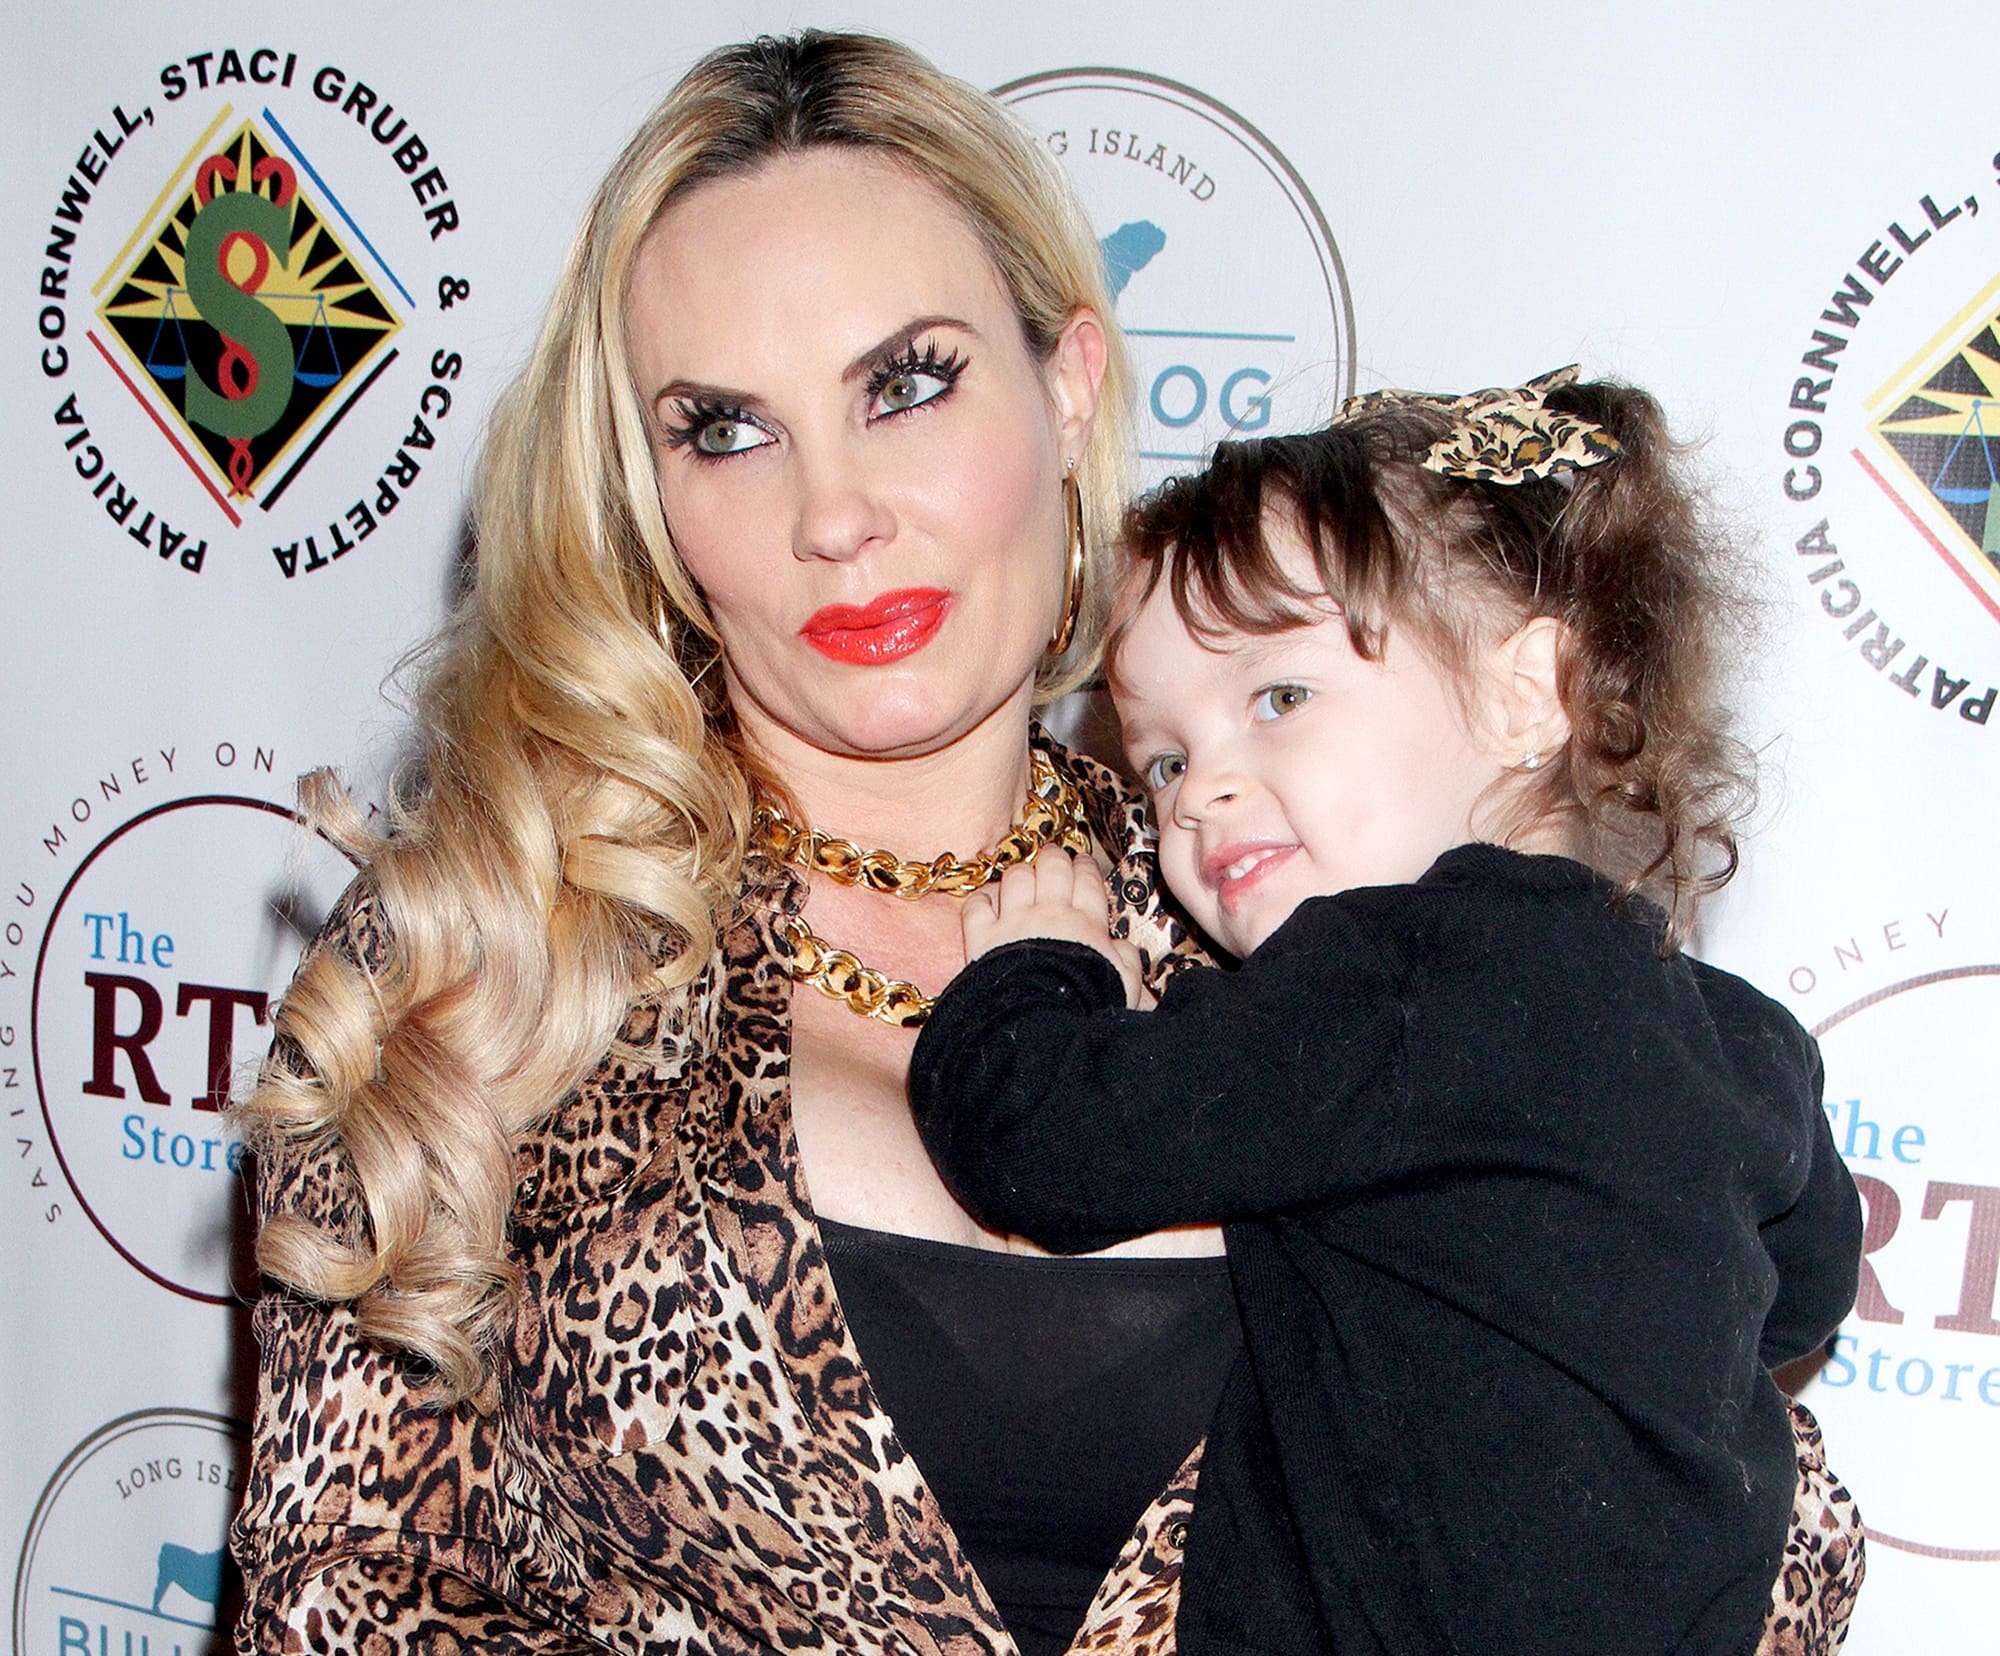 Coco Austin Is Bashed Out For Posting This Photo Of Her Husband